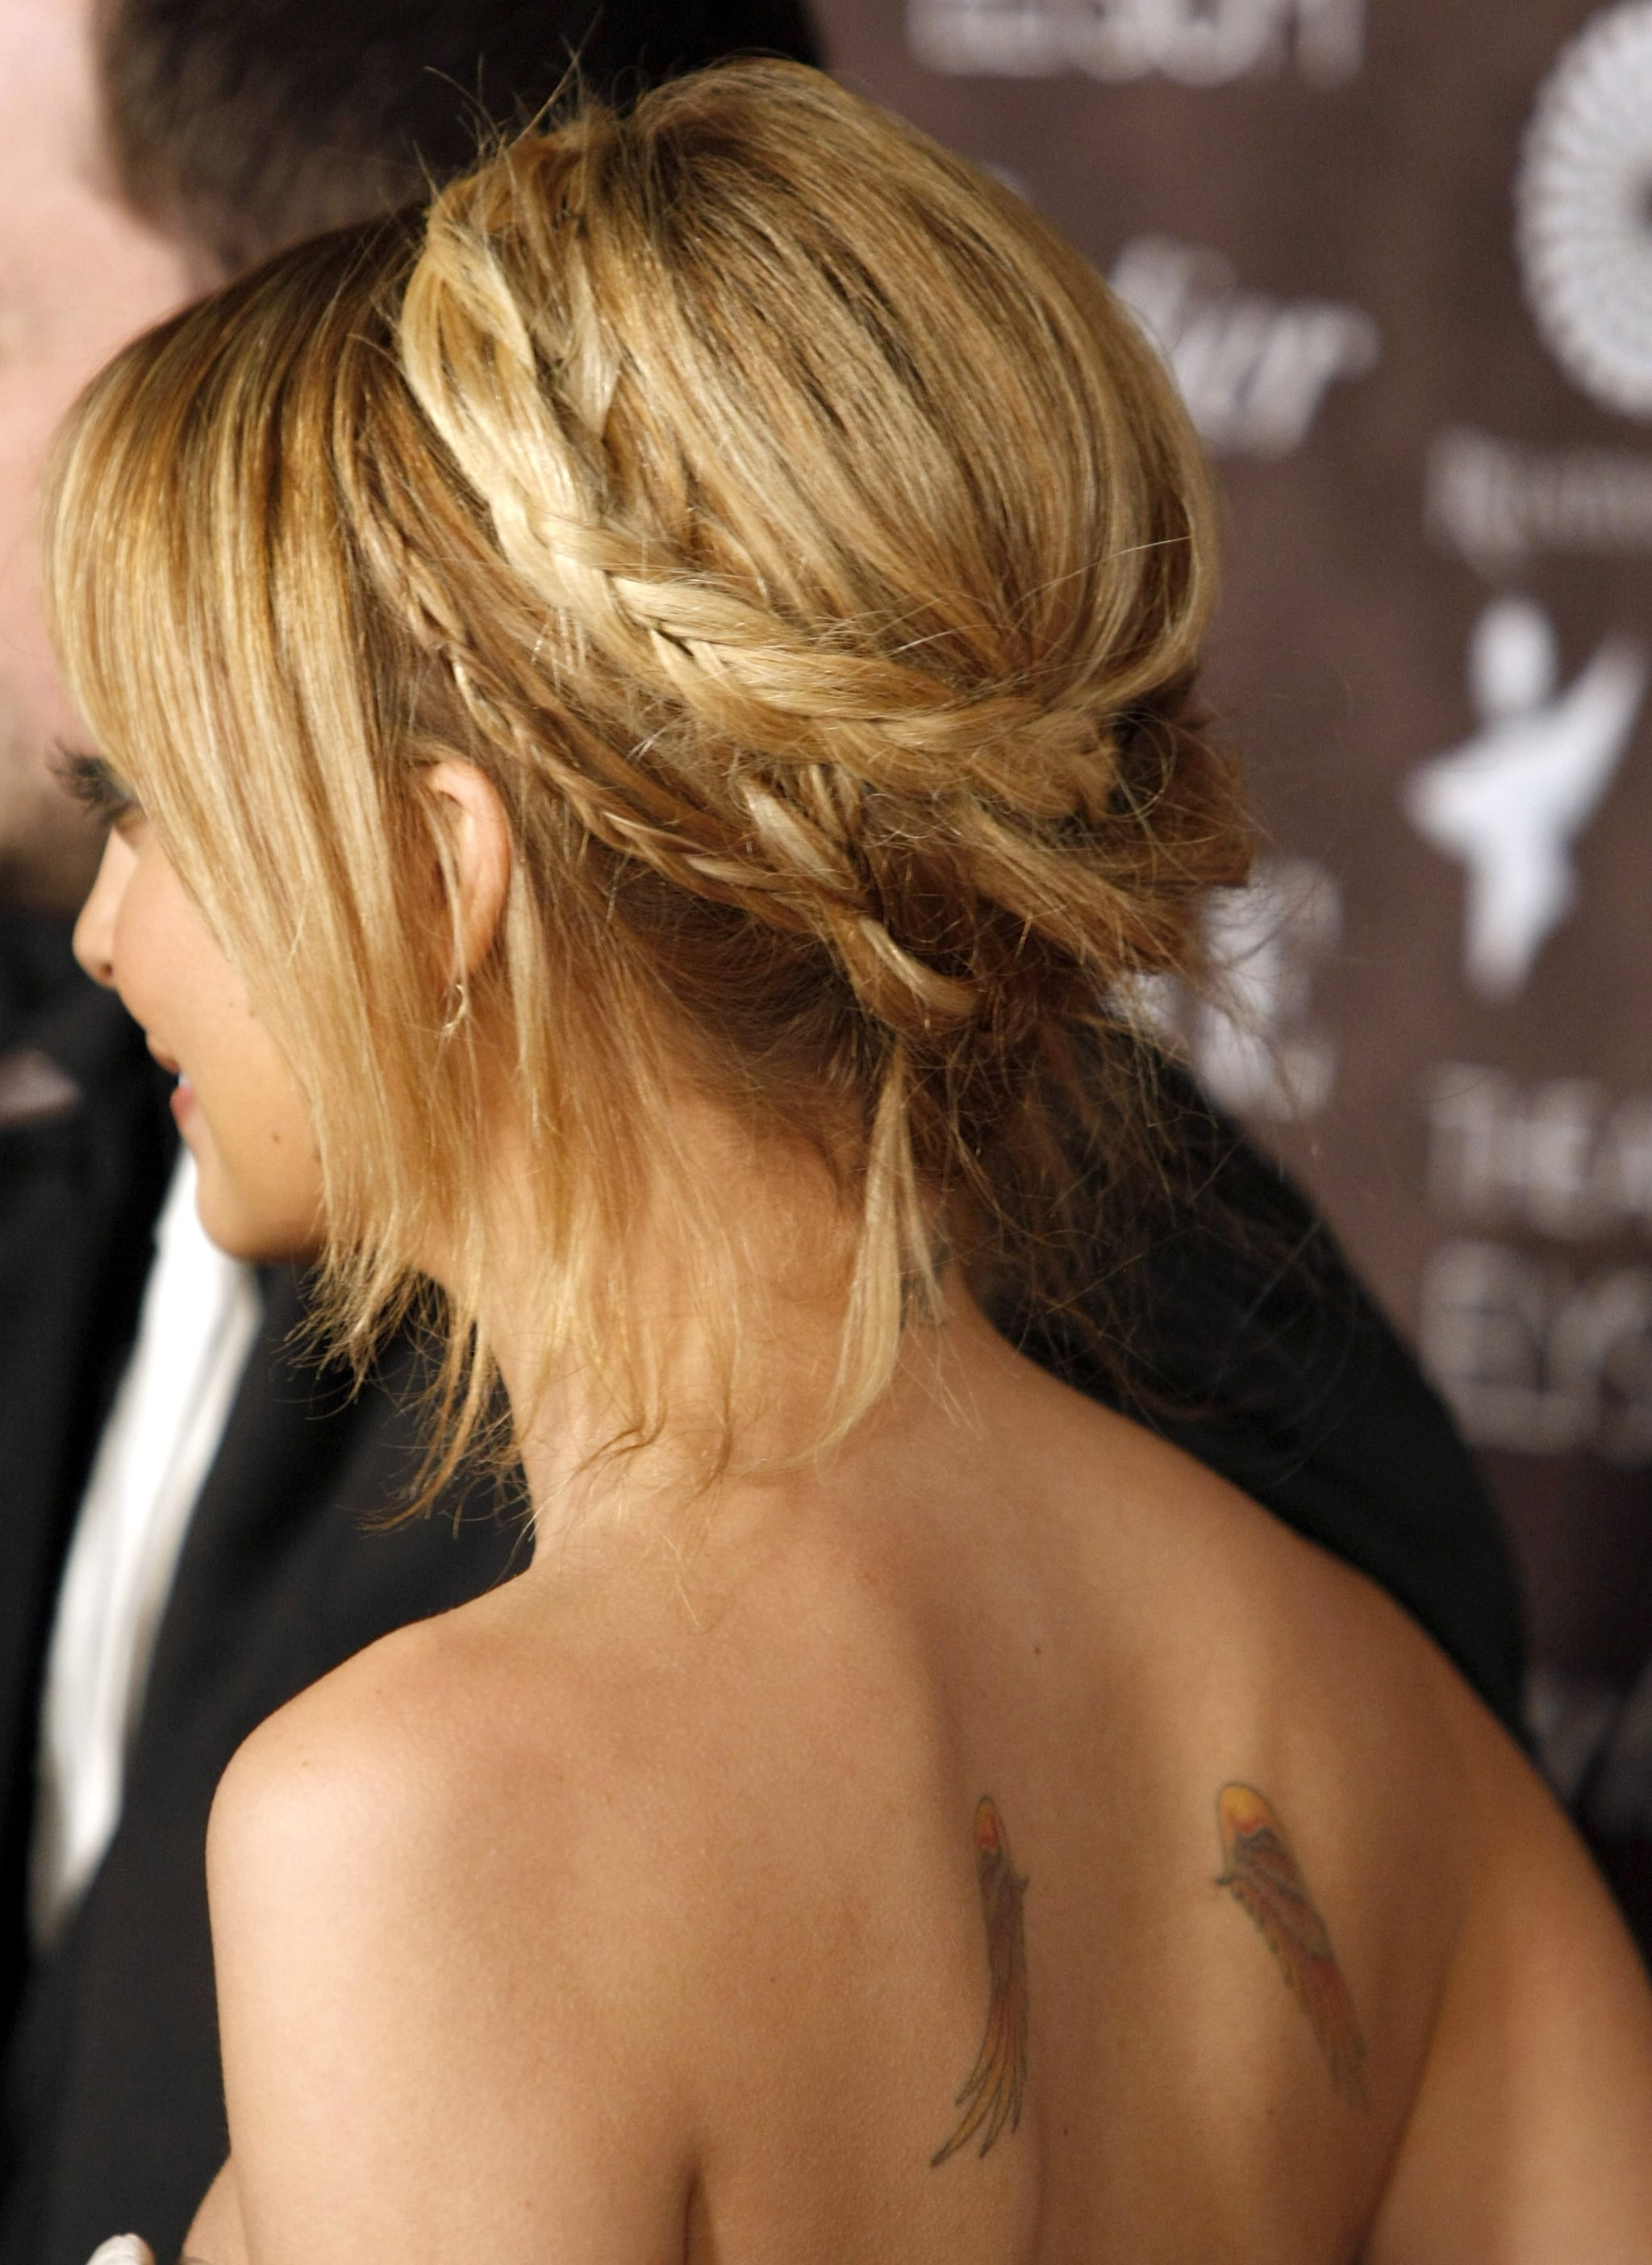 Nicole Richie S Series Of Braids Coil Together Into A Pretty